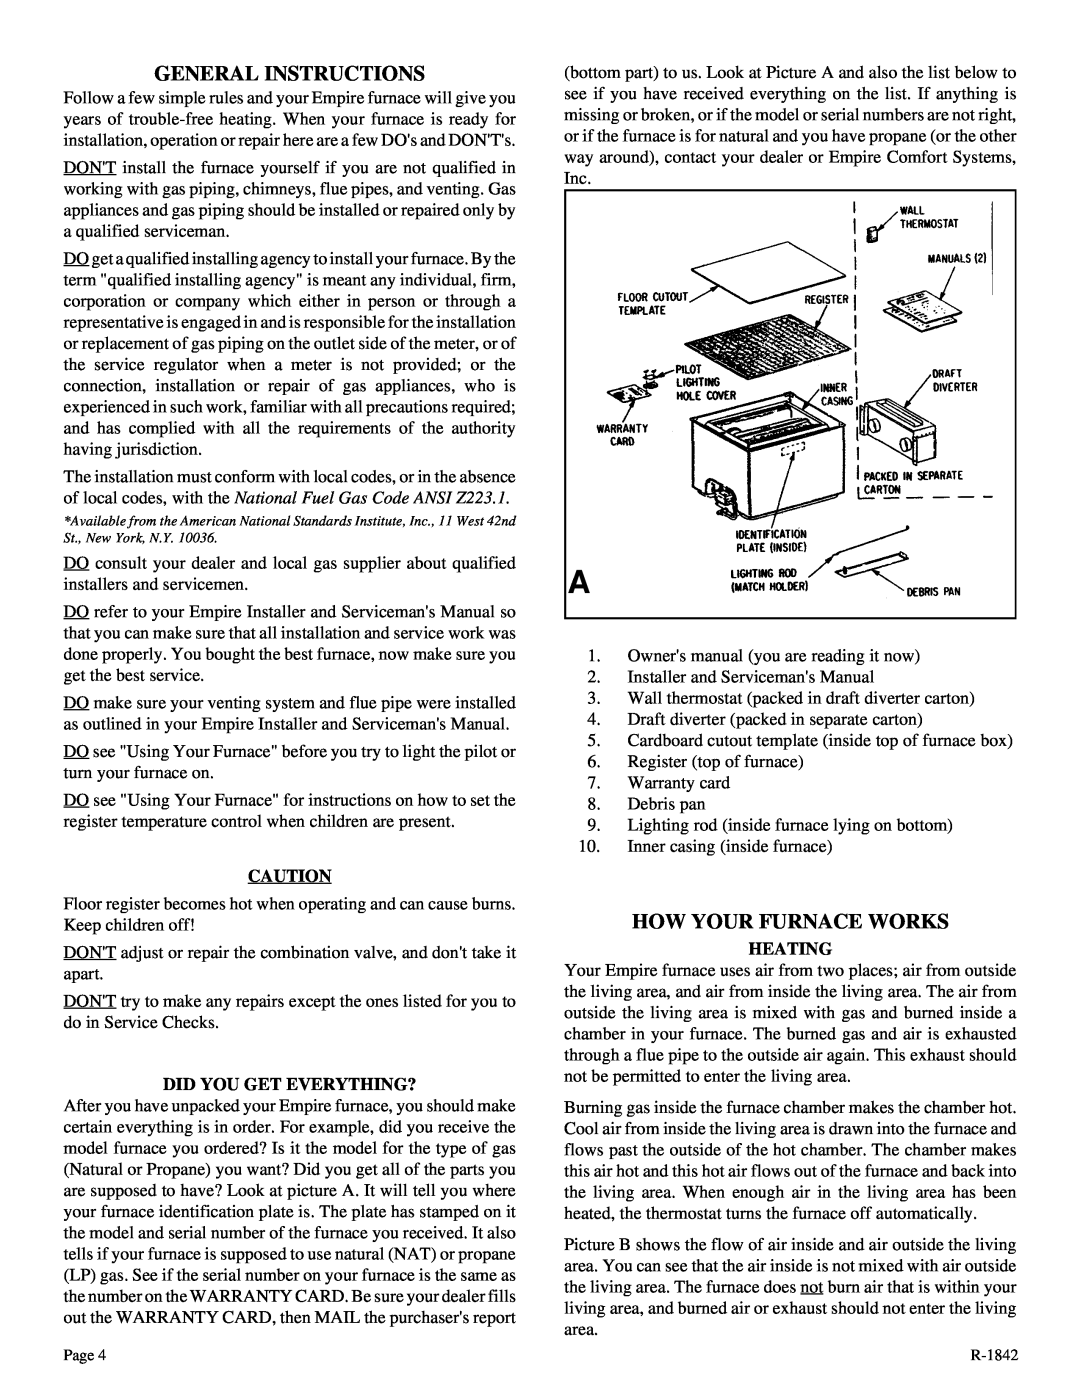 Empire Comfort Systems 7088-3, 3588-3, 5088-3 owner manual General Instructions, How Your Furnace Works 